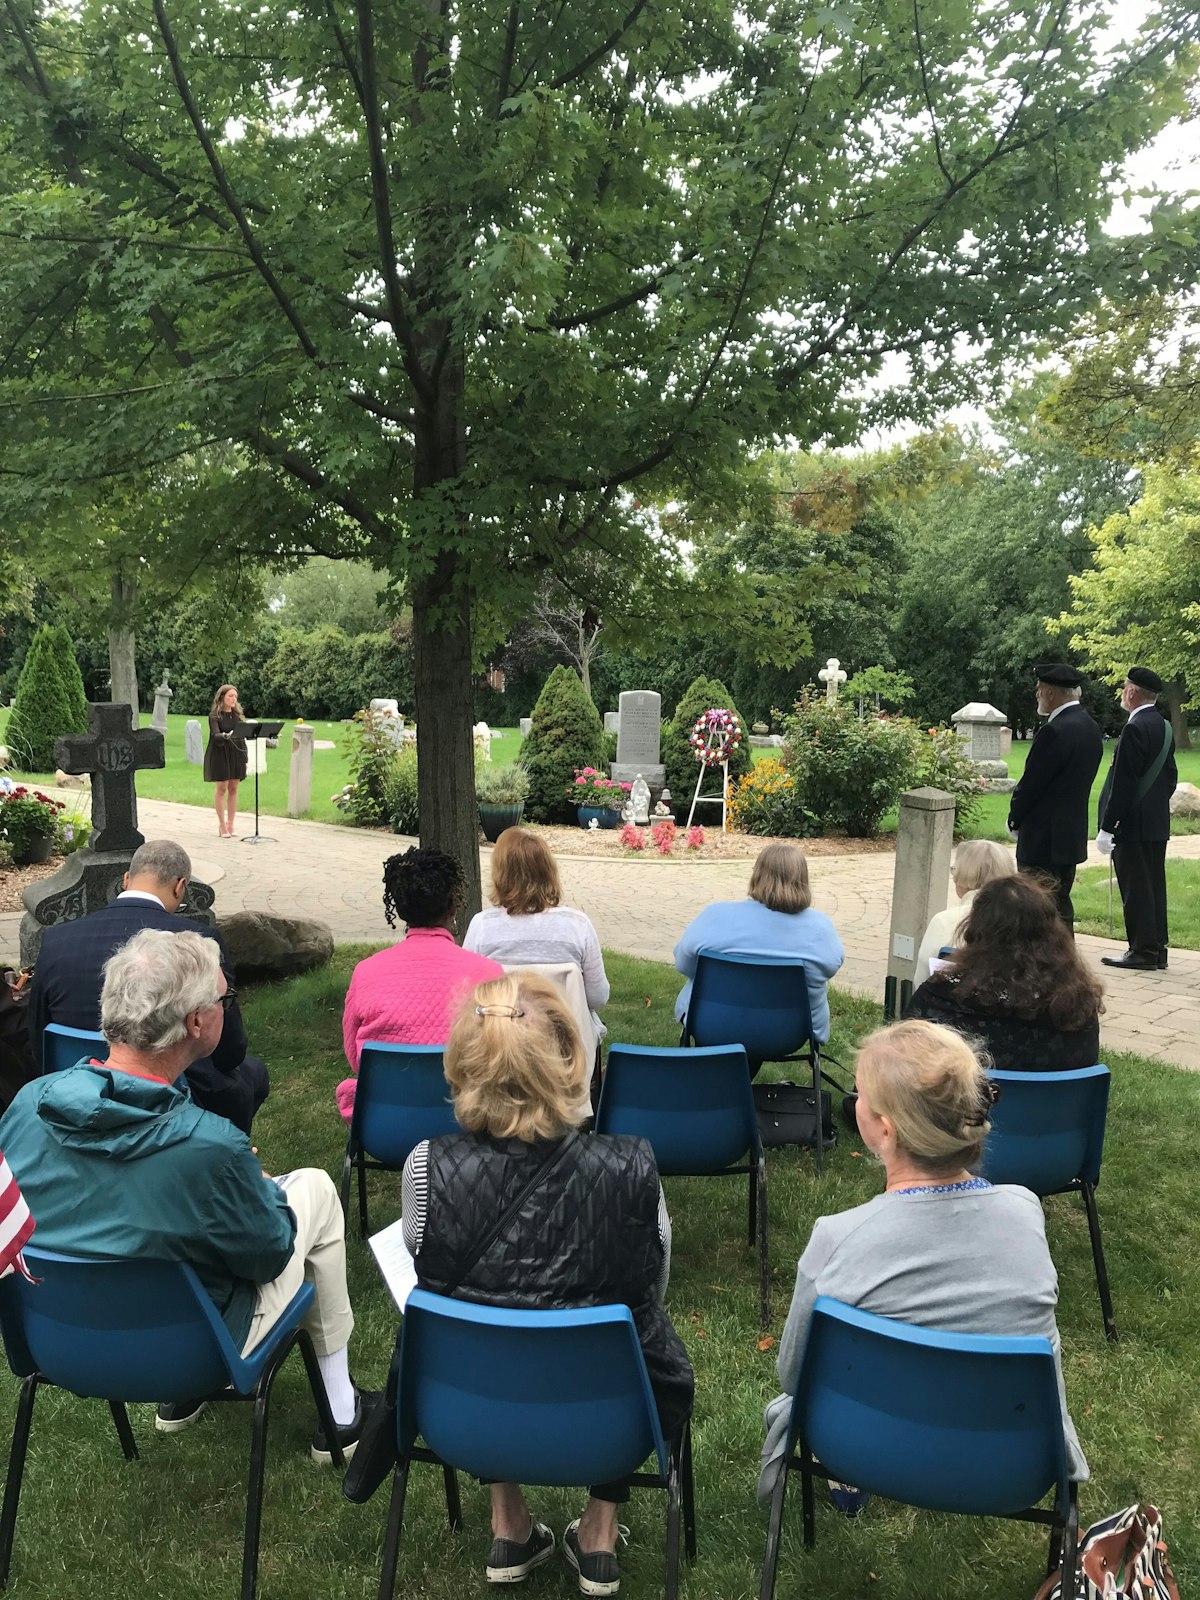 Madeline Thibault sings a hymn during the National Day of Remembrance for Aborted Children memorial service Sept. 9 at Assumption Grotto Cemetery in Detroit. (Kelly Luttinen | Special to Detroit Catholic)